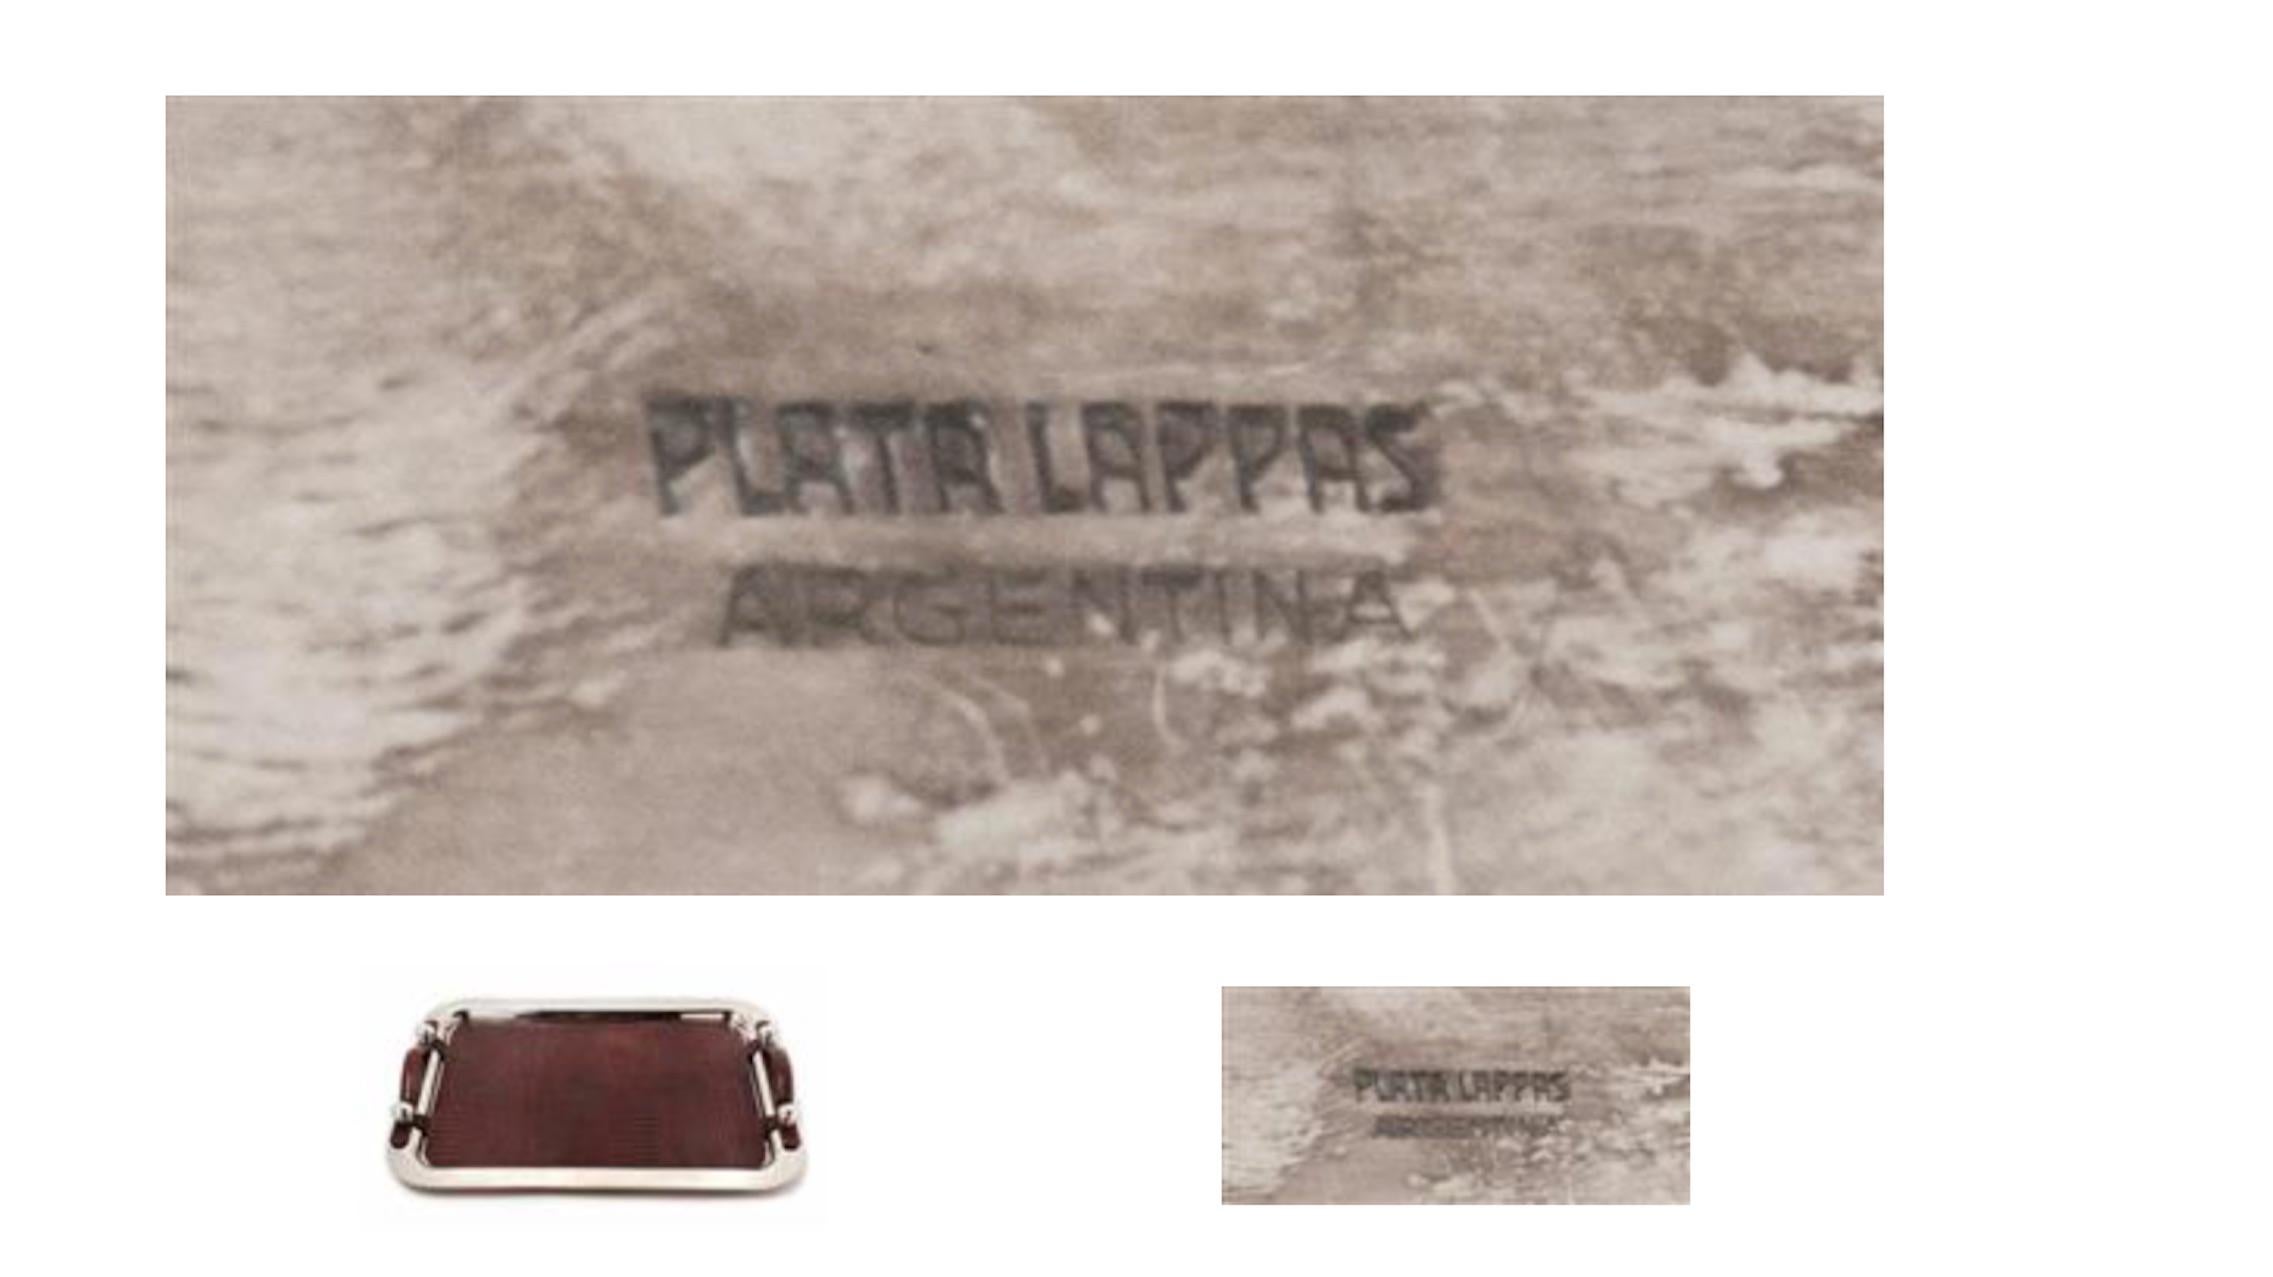 An Argentine silver plate and leather serving tray 
Plata Lappas, Buenos Aires, 20th century 
the tray with a spot-hammered finish. 
marked 'Plata Lappas/ Argentina' to the underside 
Width of tray 26 3/4 inches.